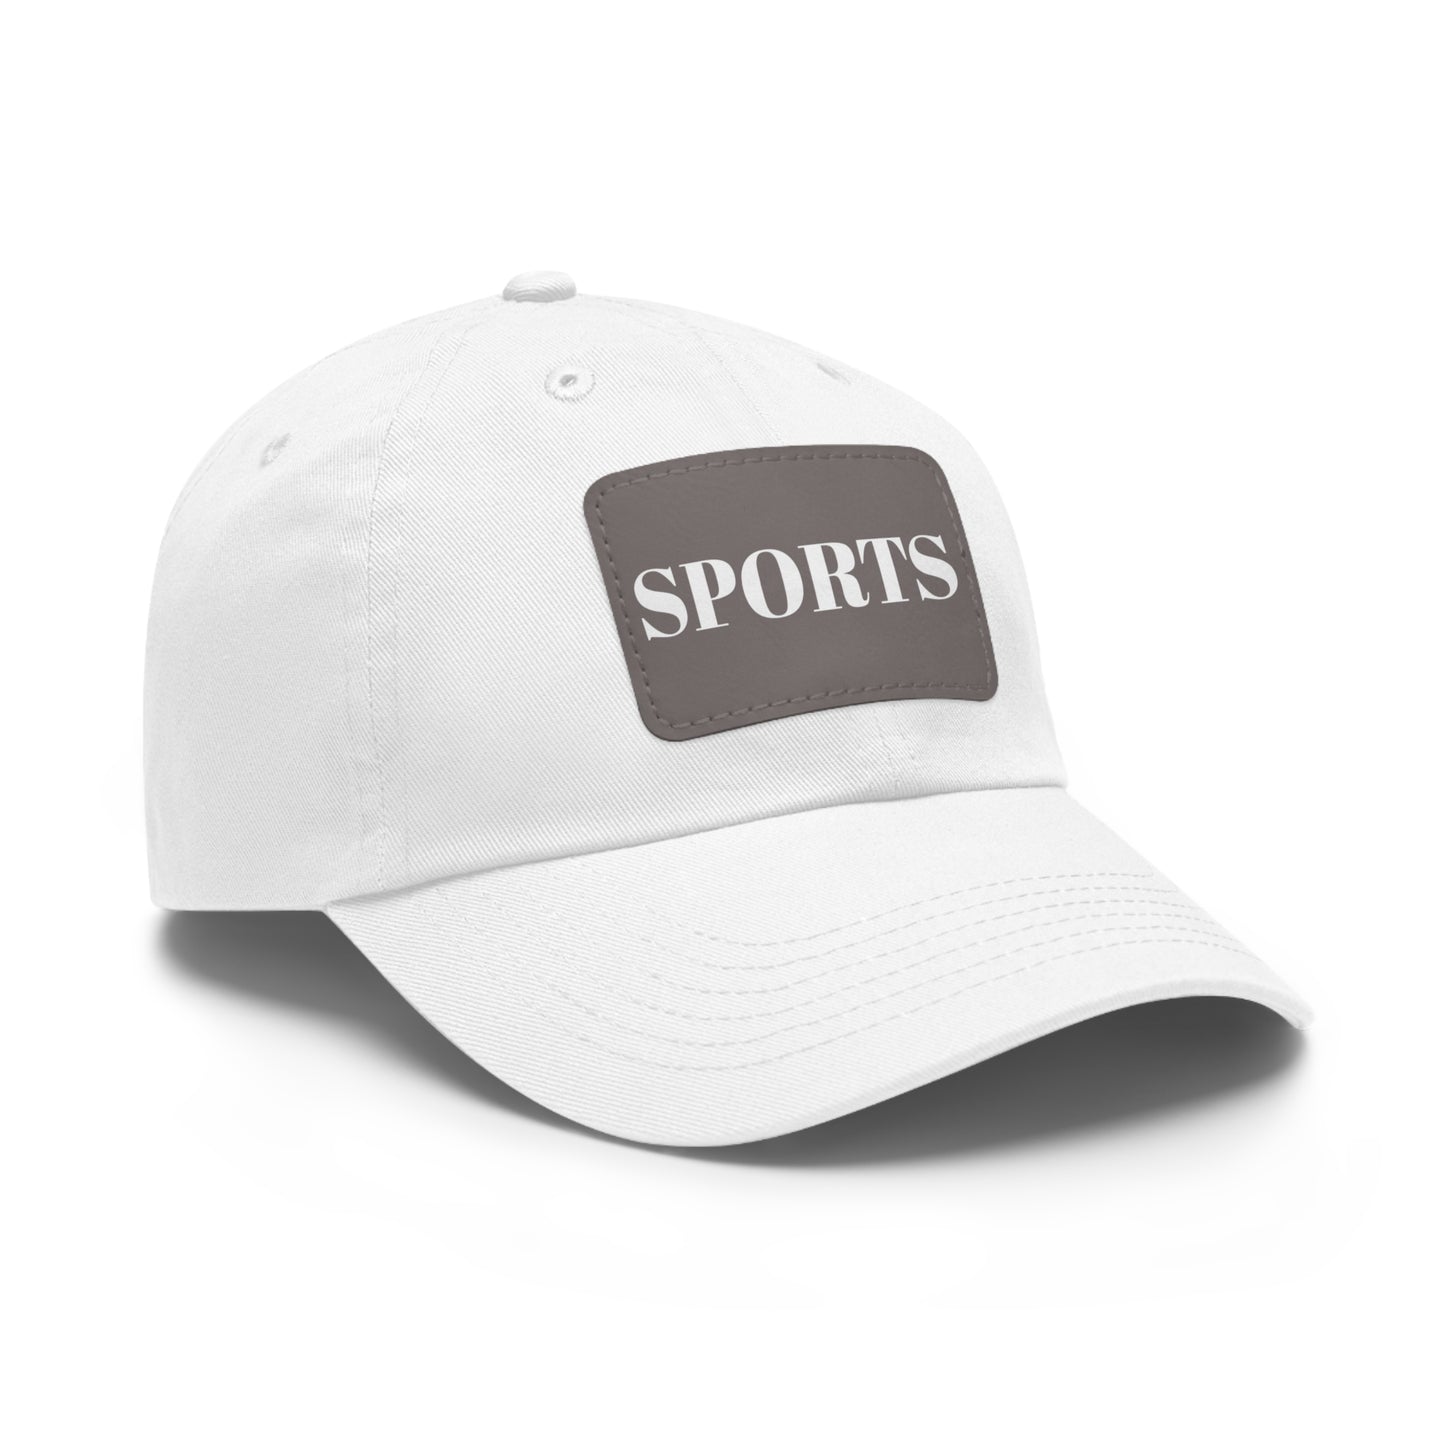 SPORTS Hat with Leather Patch